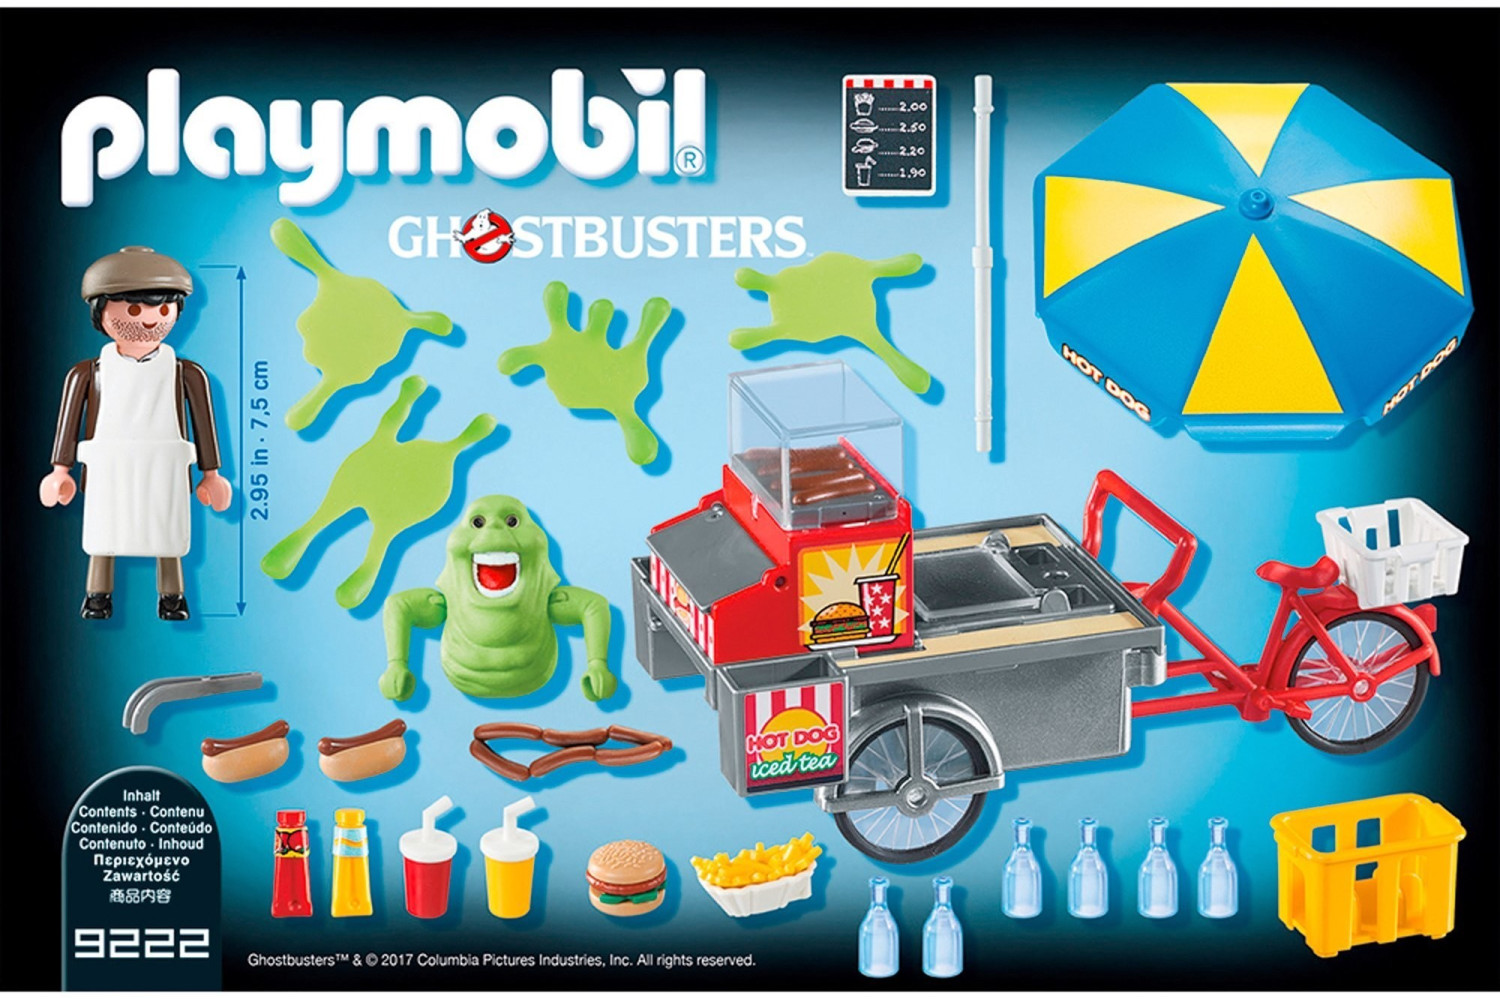 Playmobil Ghostbusters - Slimer con Stand de Hot Dog (9222) desde 22,91 €